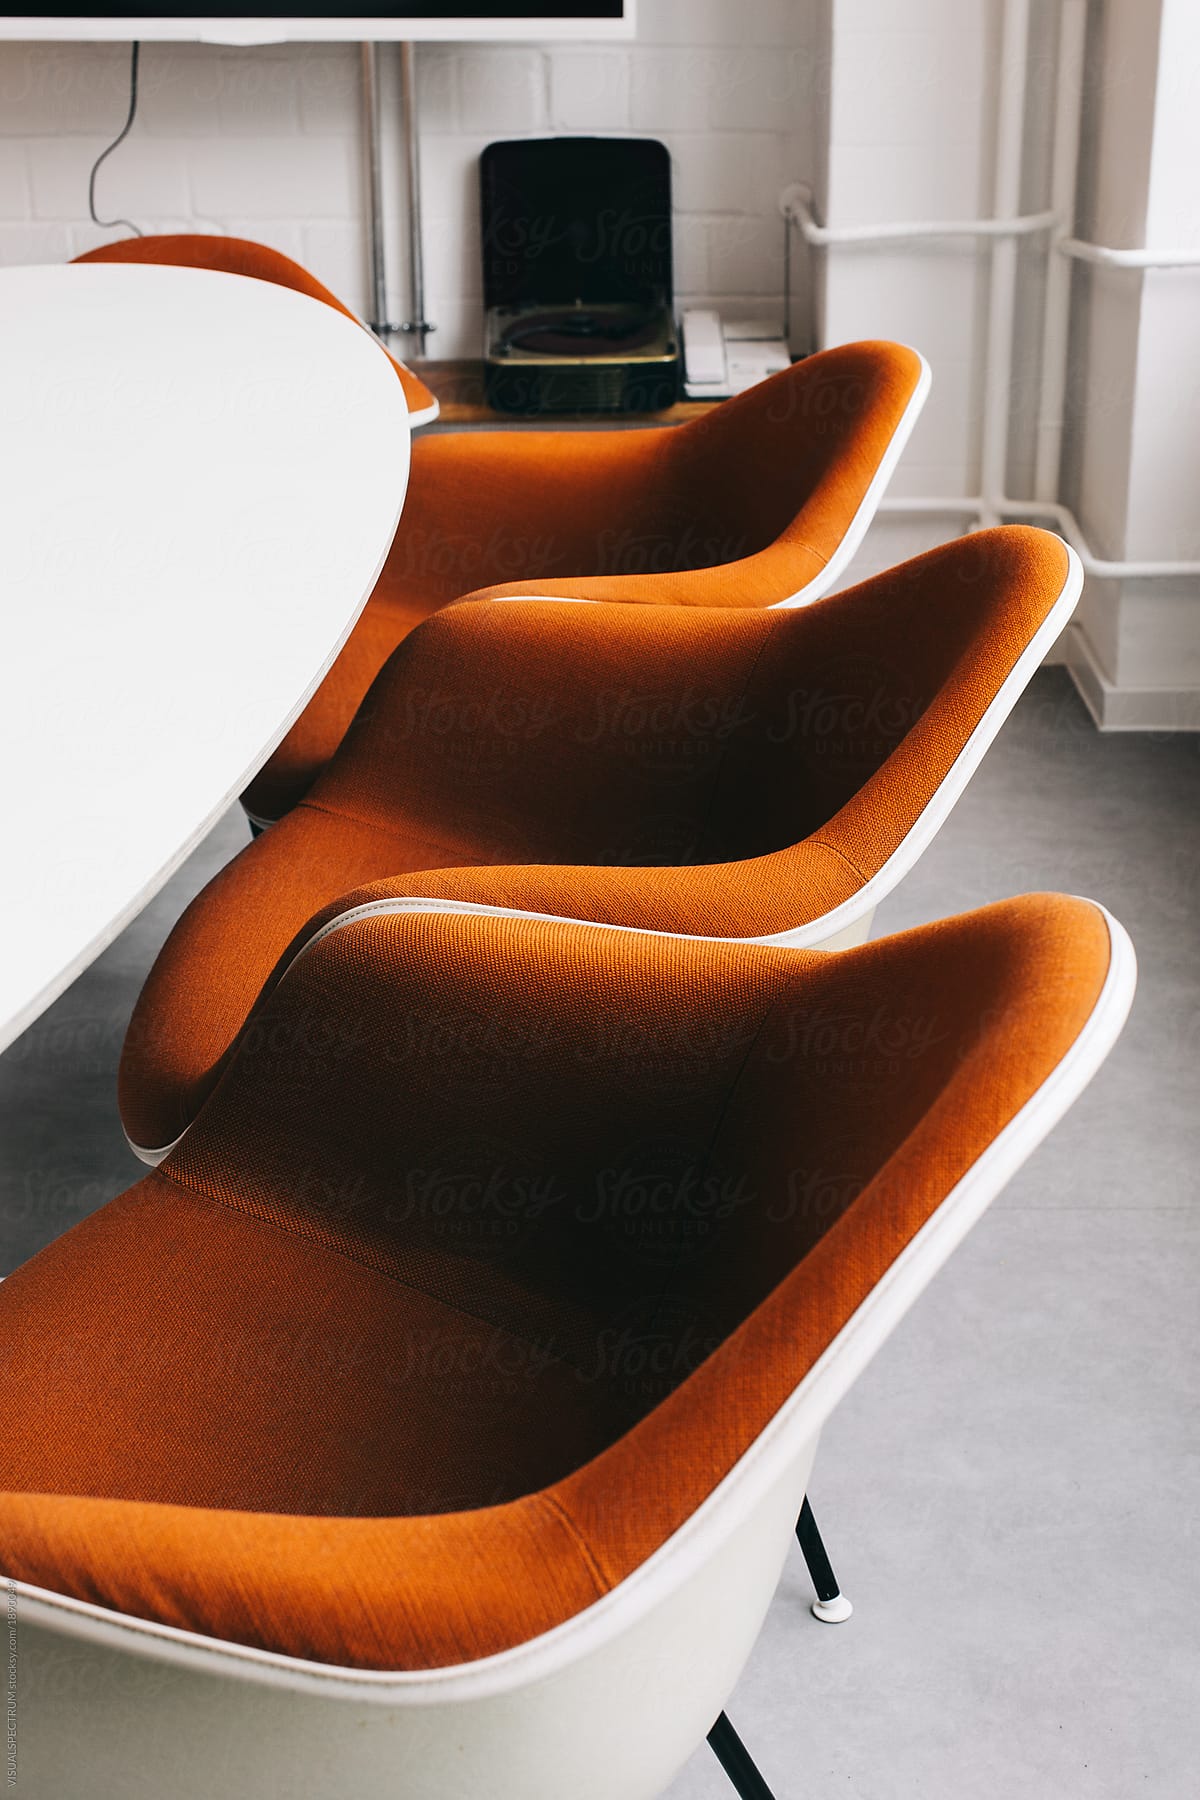 Retro 1970s Designer Chairs In Bright Conference Room By